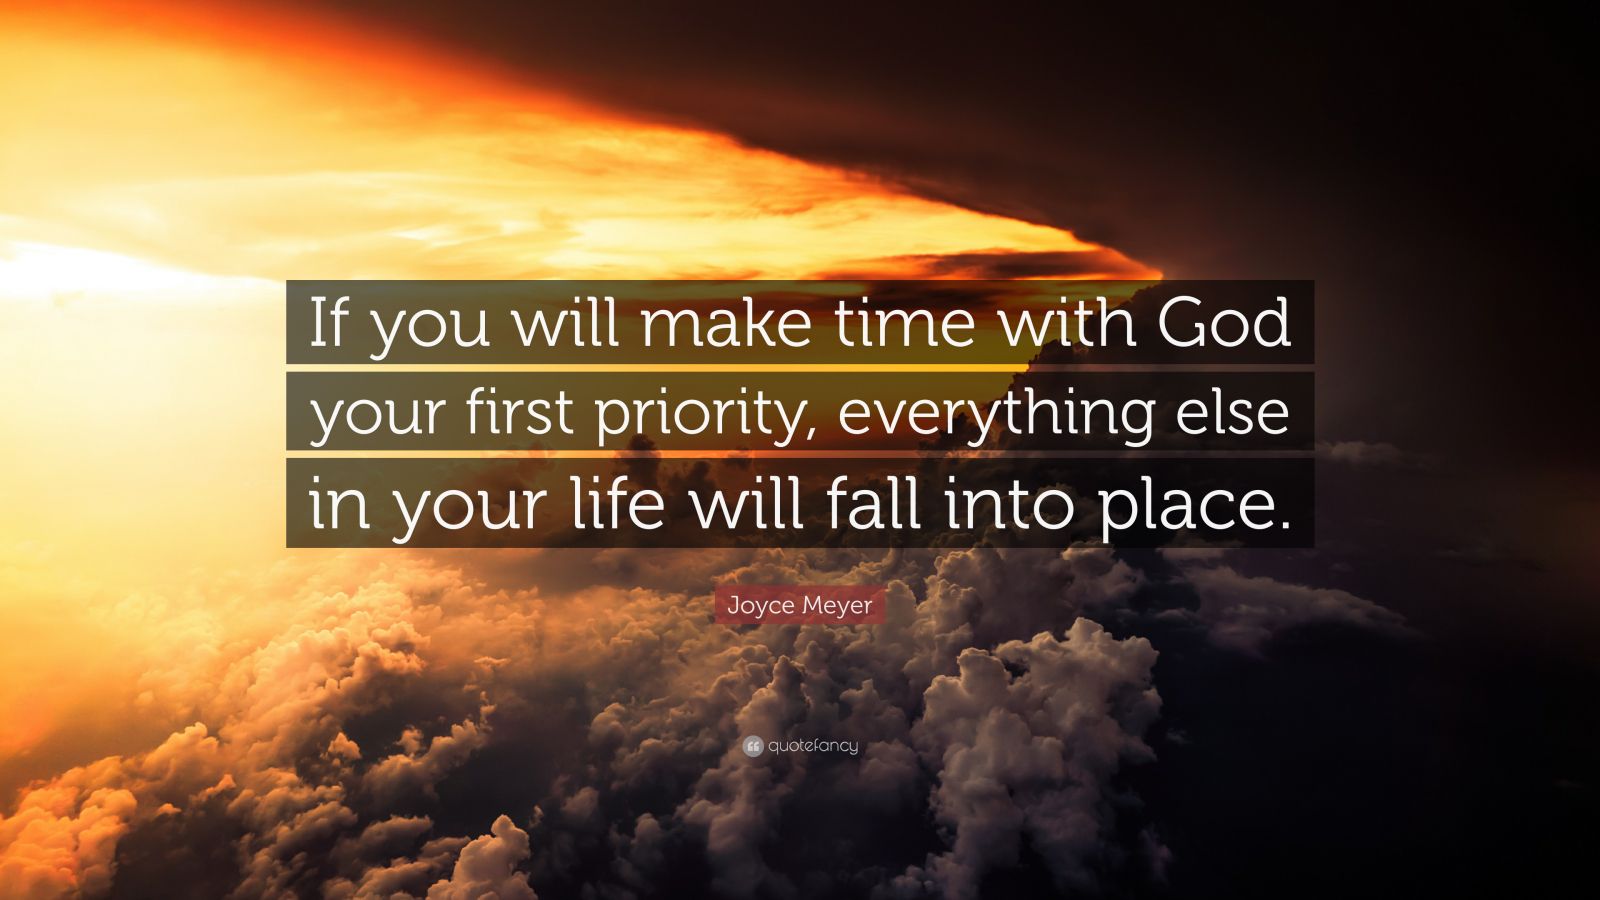 Joyce Meyer Quote: “If you will make time with God your first priority